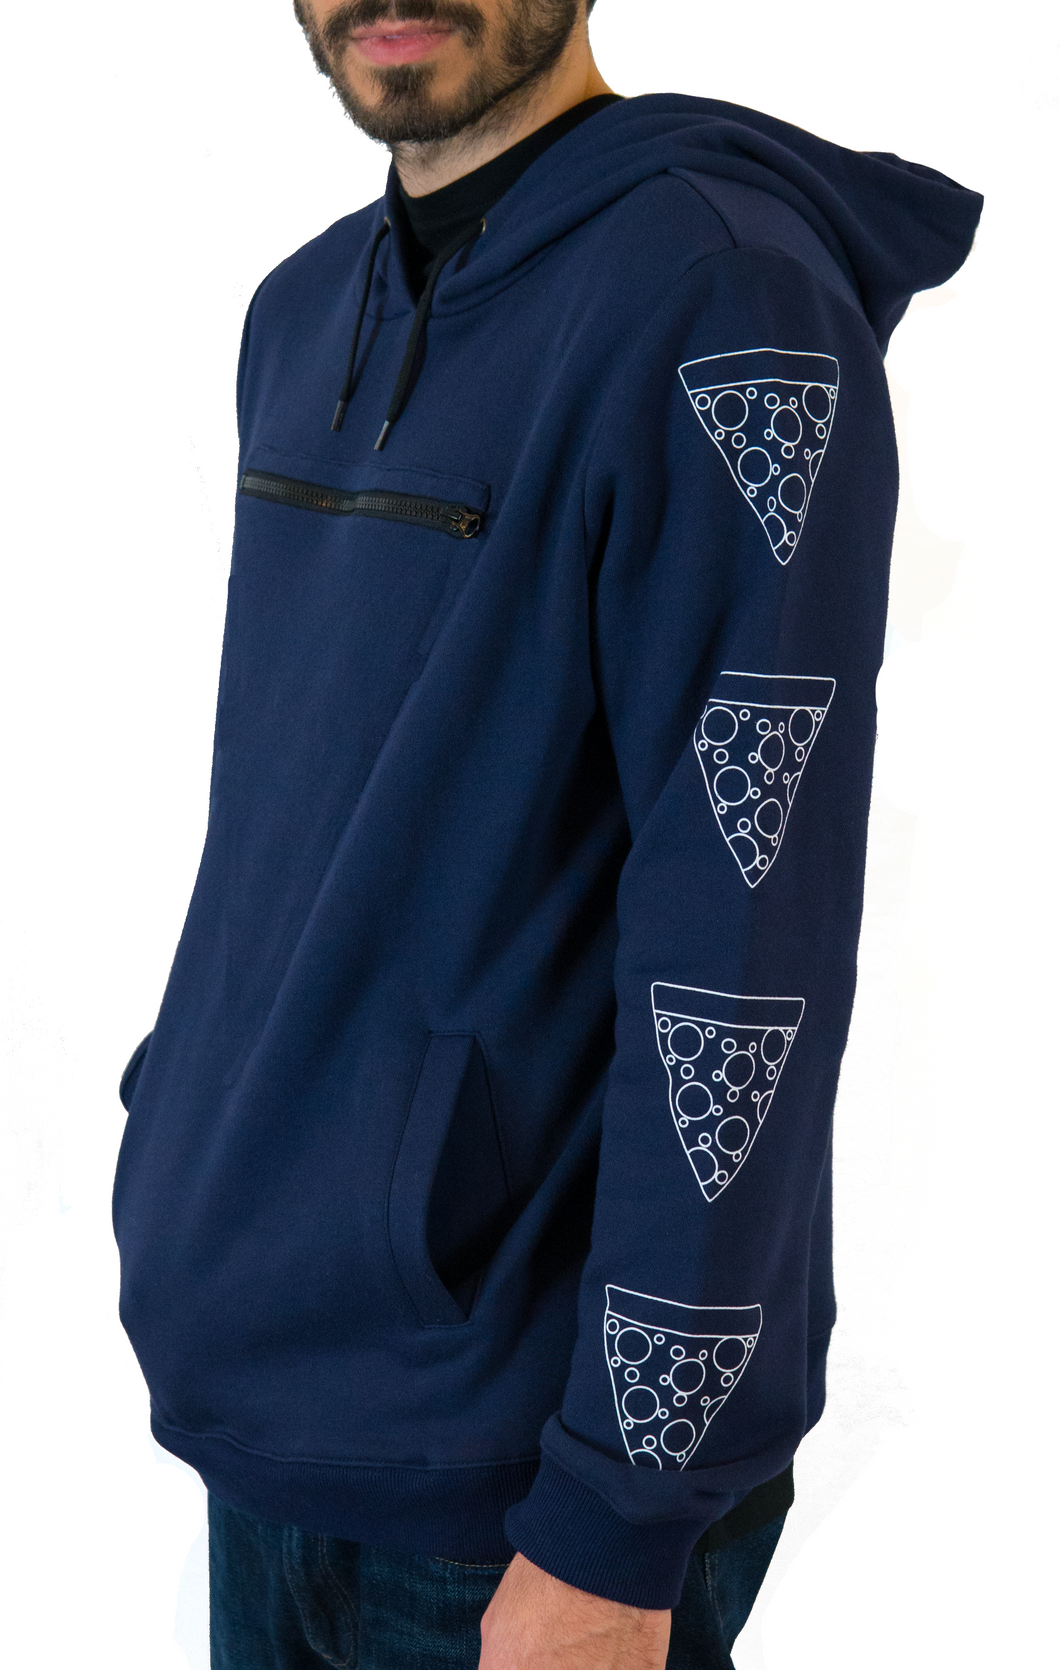 Pizza Pocket Hoodie - Limited Sleeve Edition 2020